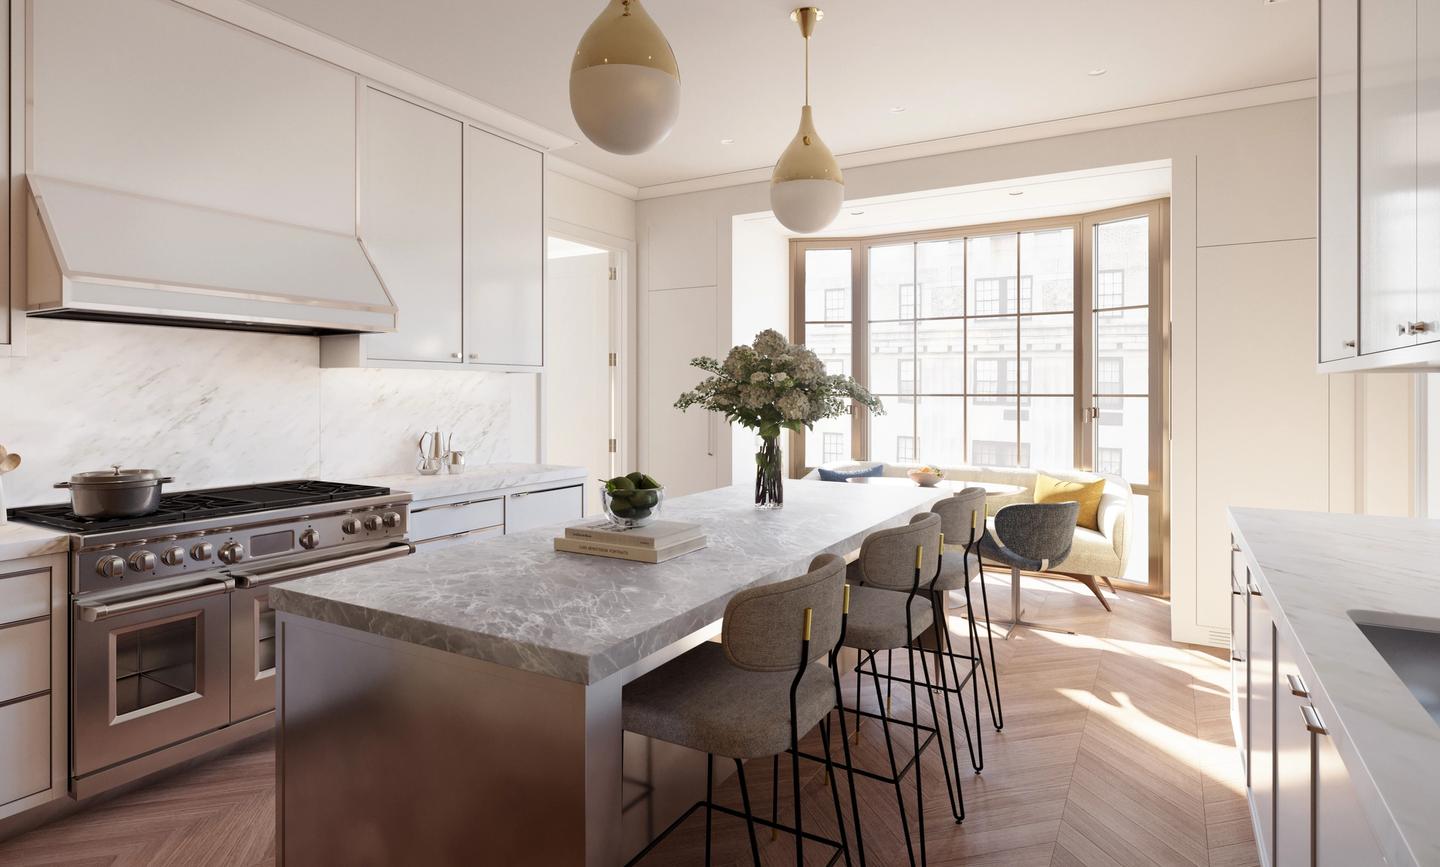 Windowed kitchen in half-floor residence; all kitchens feature premium Wolf and Sub-Zero appliances, including vented range hoods, Dornbracht fittings, and Miele dishwashers